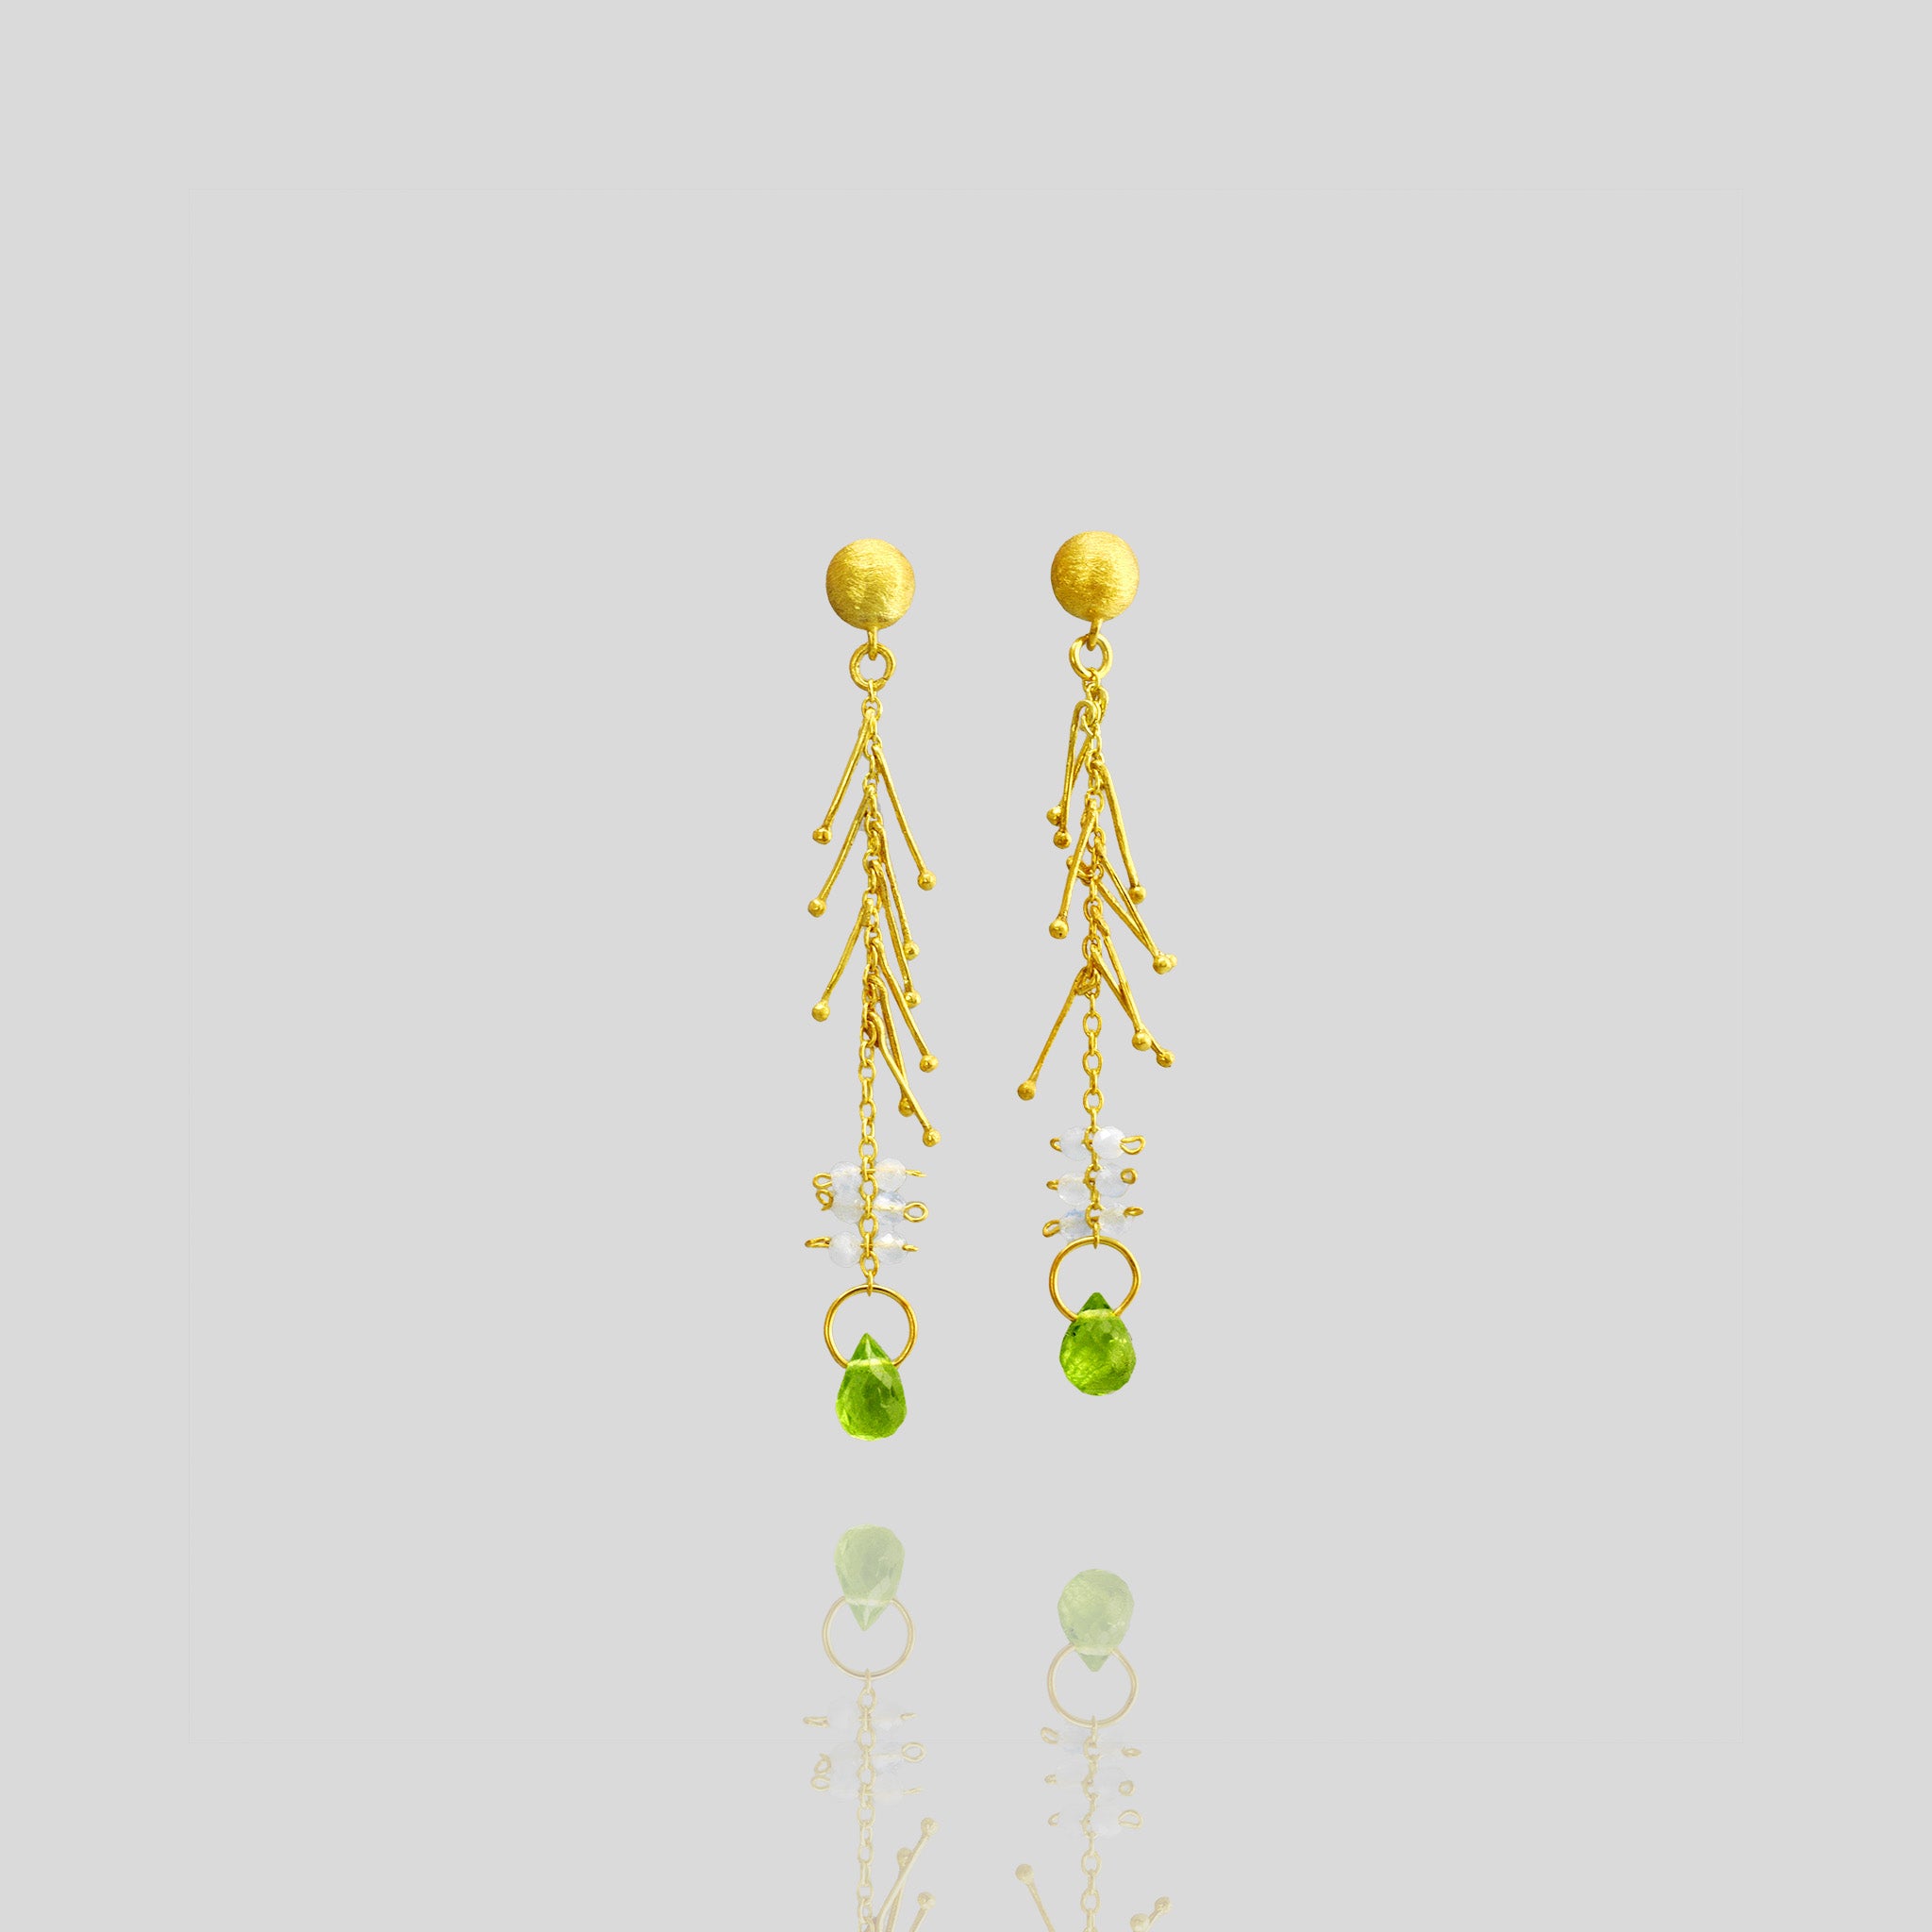 18k Yellow Gold Venus Stud Earrings with Aquamarine and Peridot accents, inspired by the goddess emerging from the sea. Light and fluid, adding celestial charm to any look.